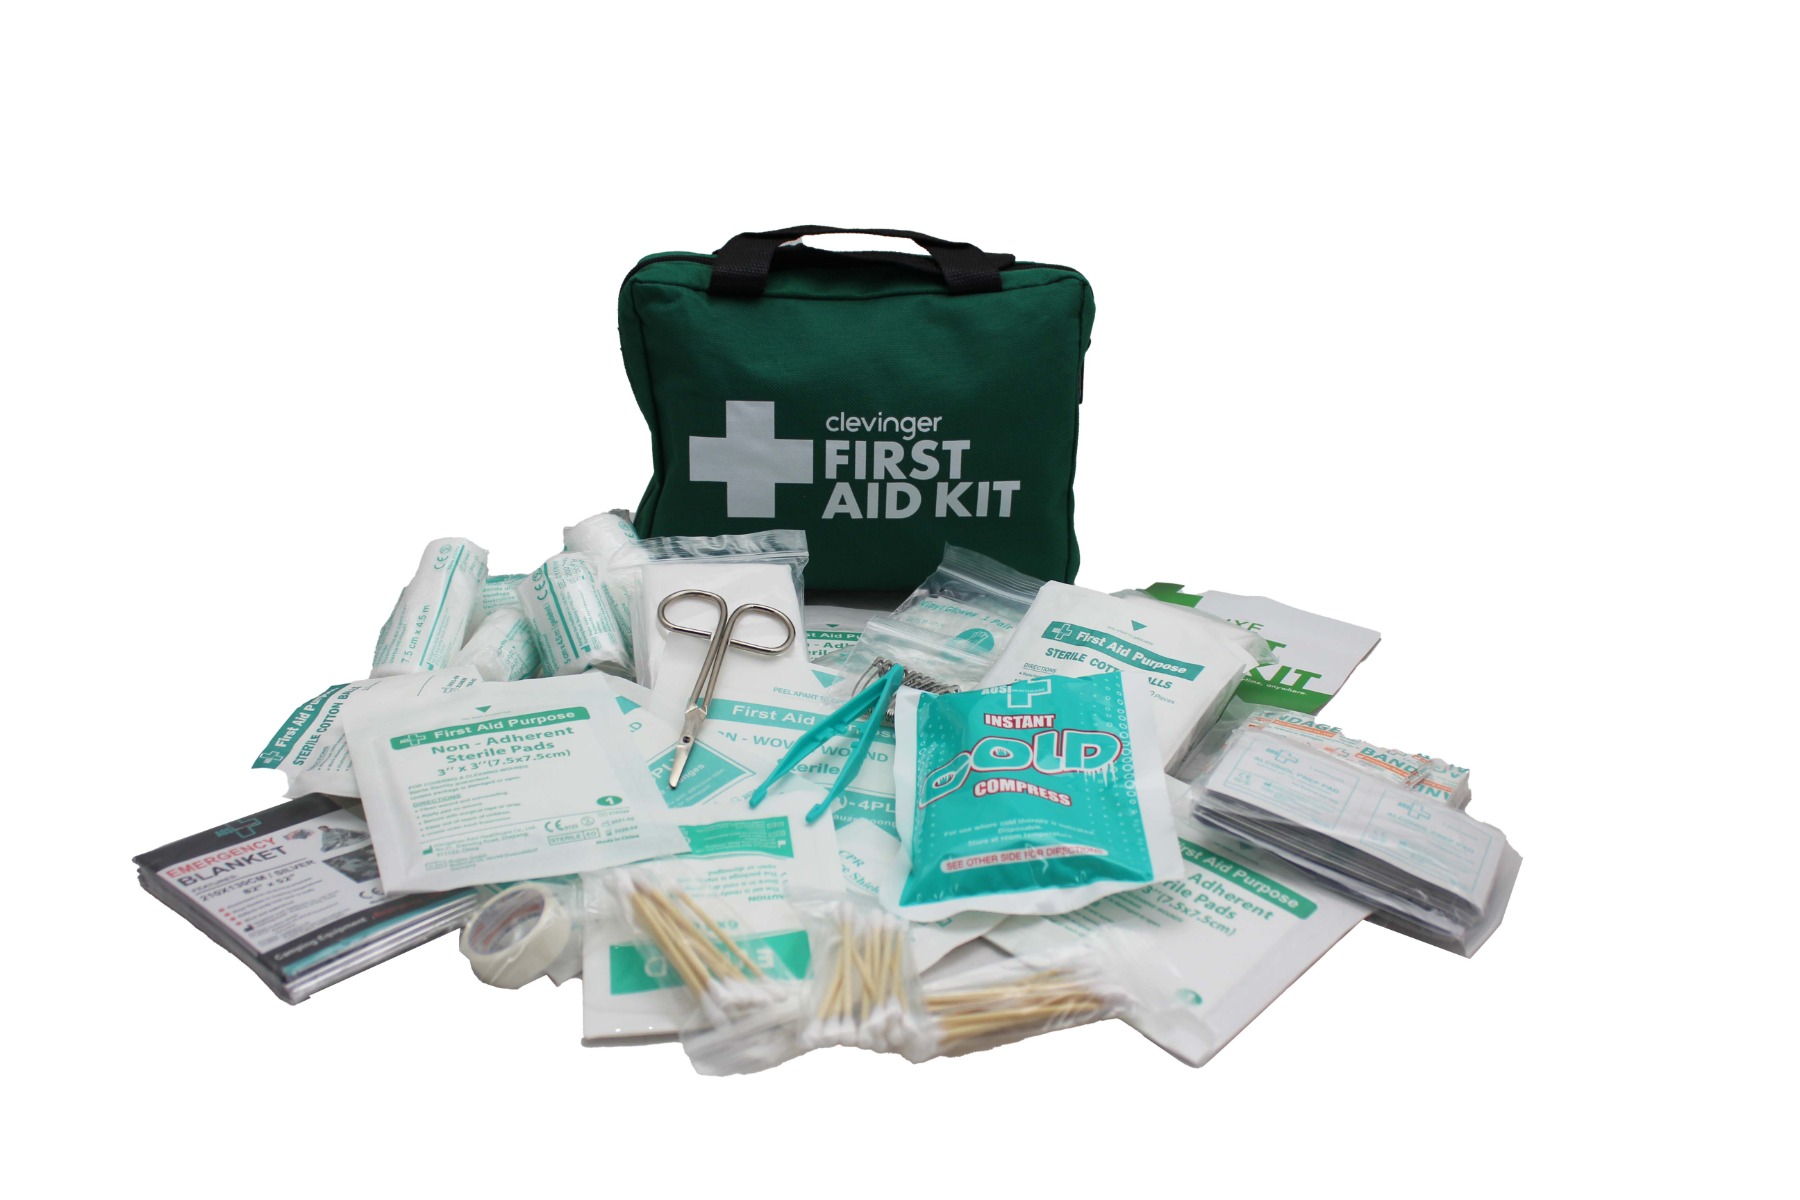 Clevinger 210 piece deluxe First Aid Kit Contents